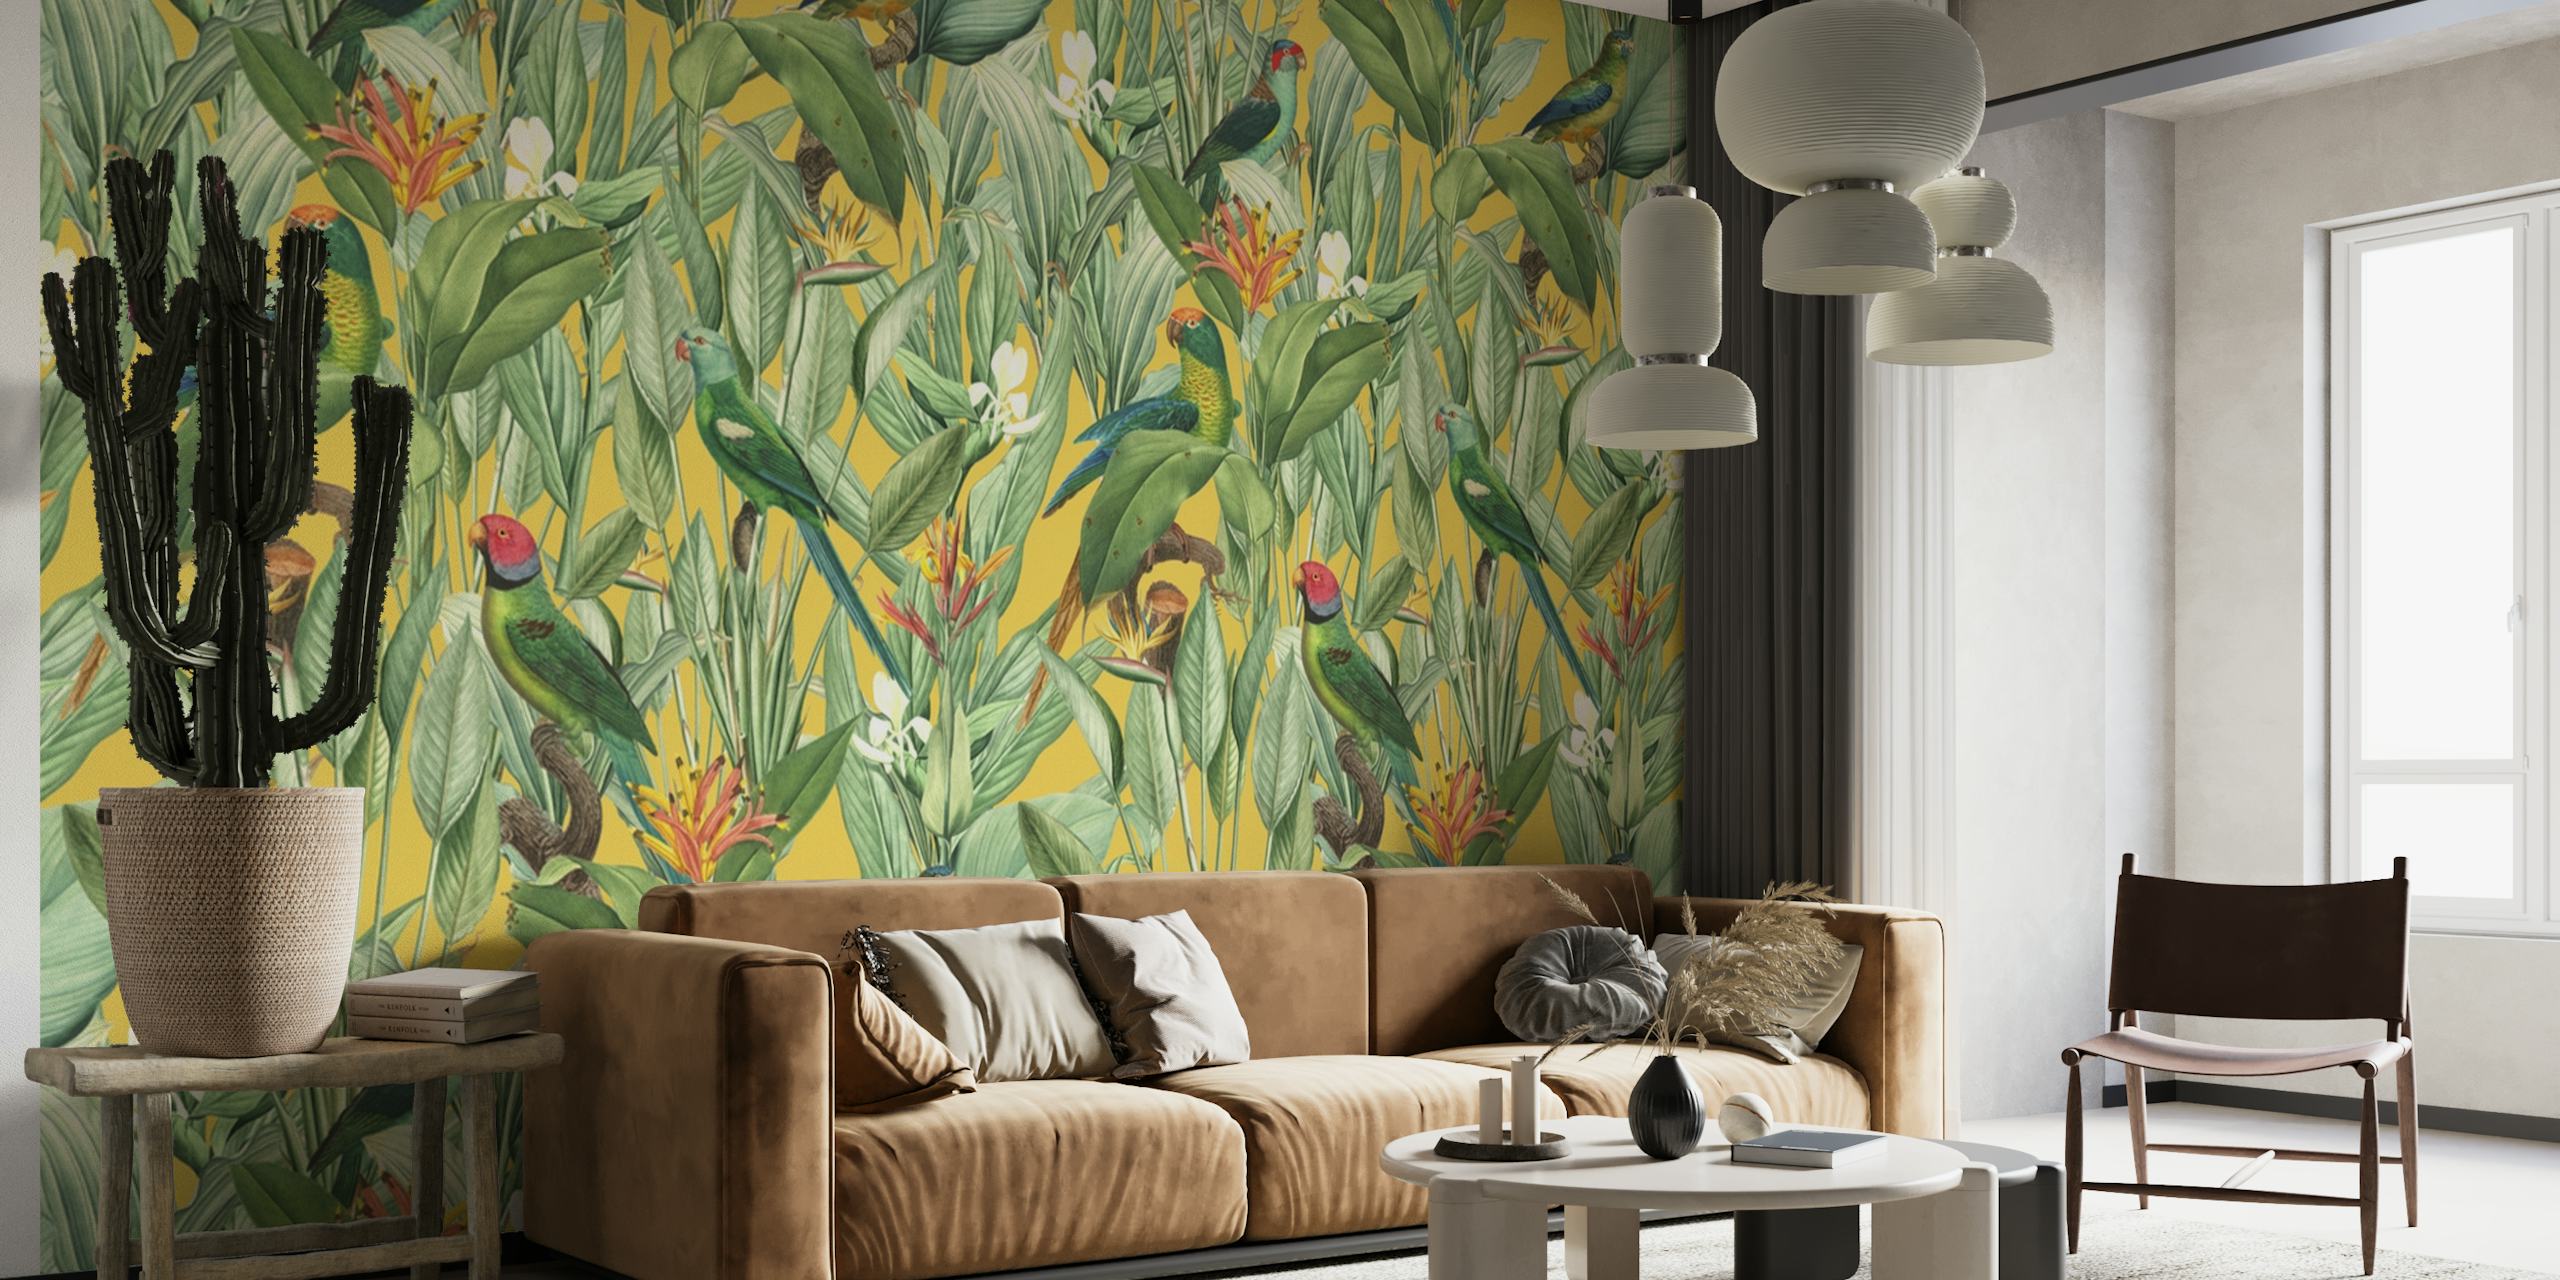 Vintage-inspired wall mural featuring a tropical jungle scene with golden accents